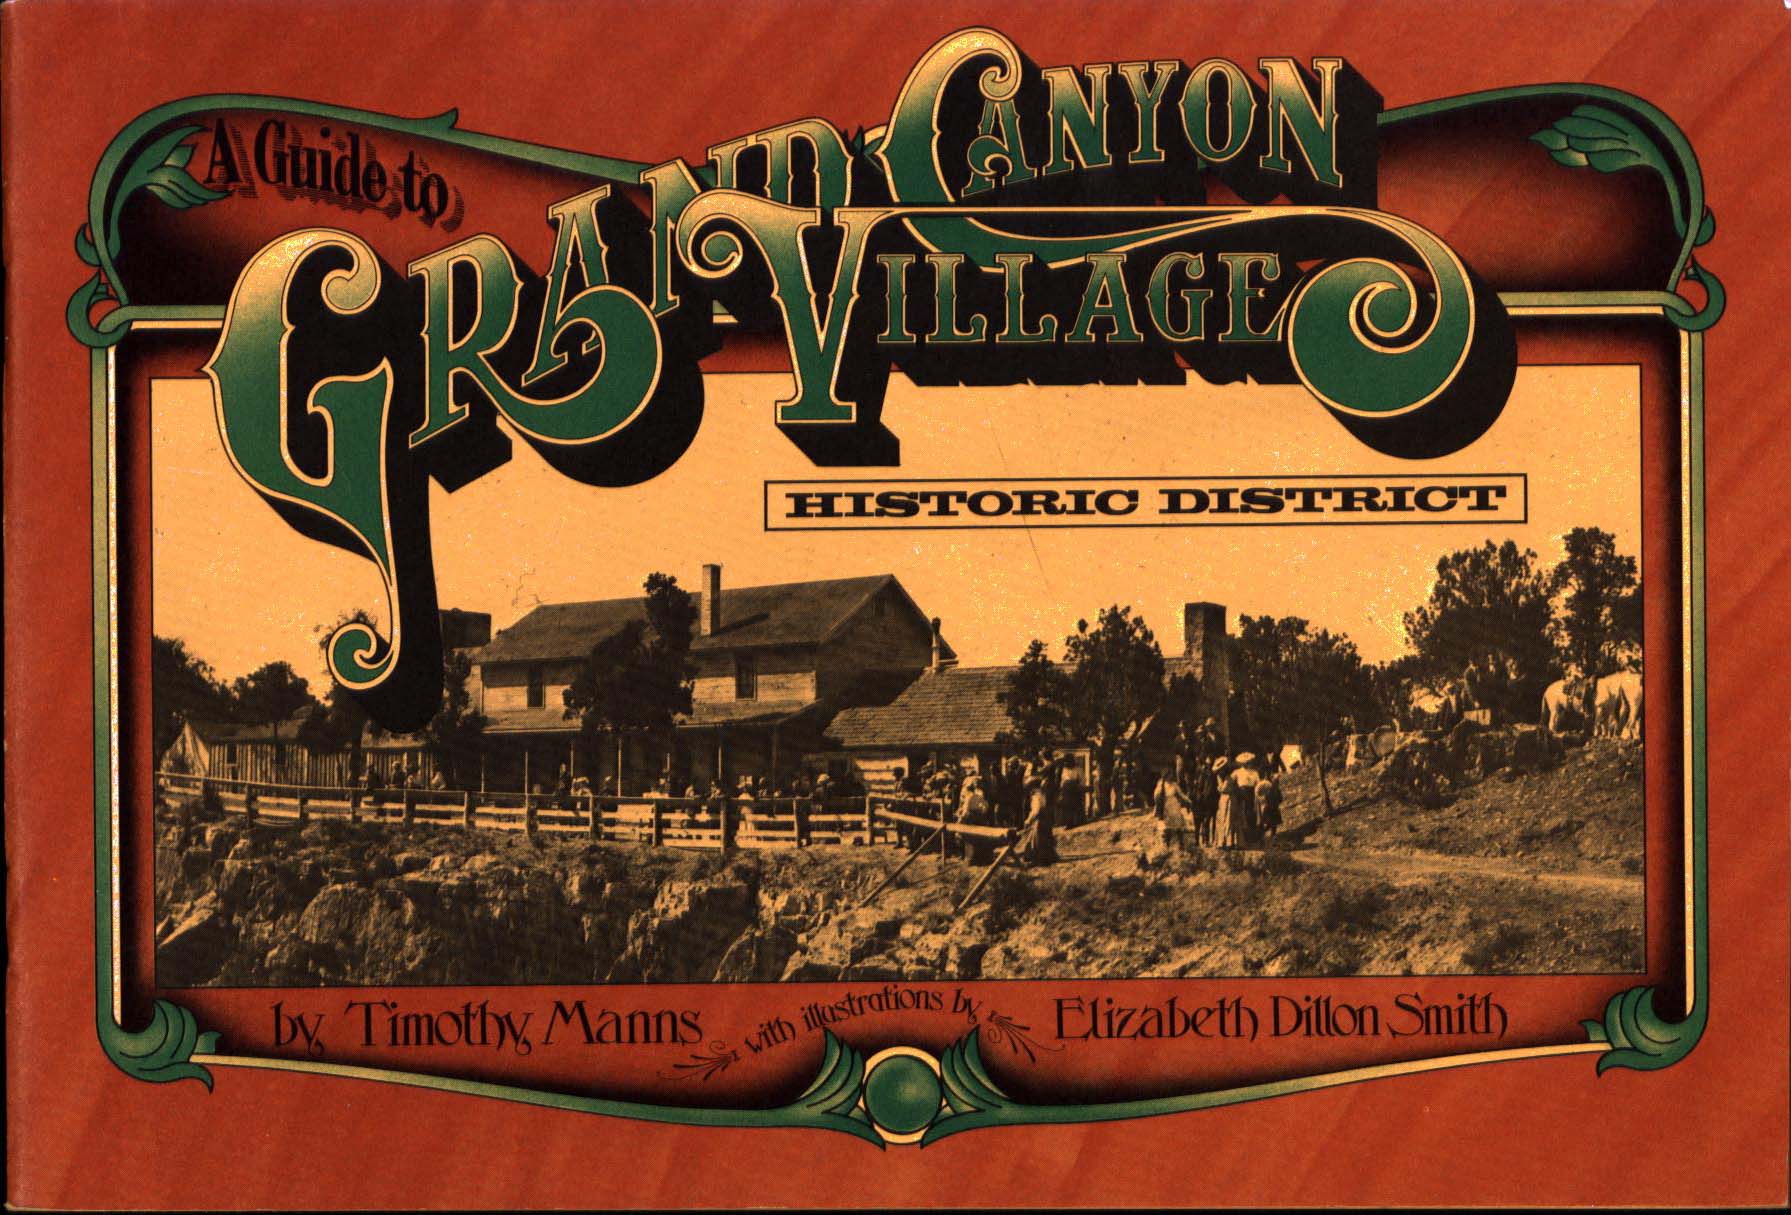 A GUIDE TO GRAND CANYON VILLAGE HISTORIC DISTRICT. 